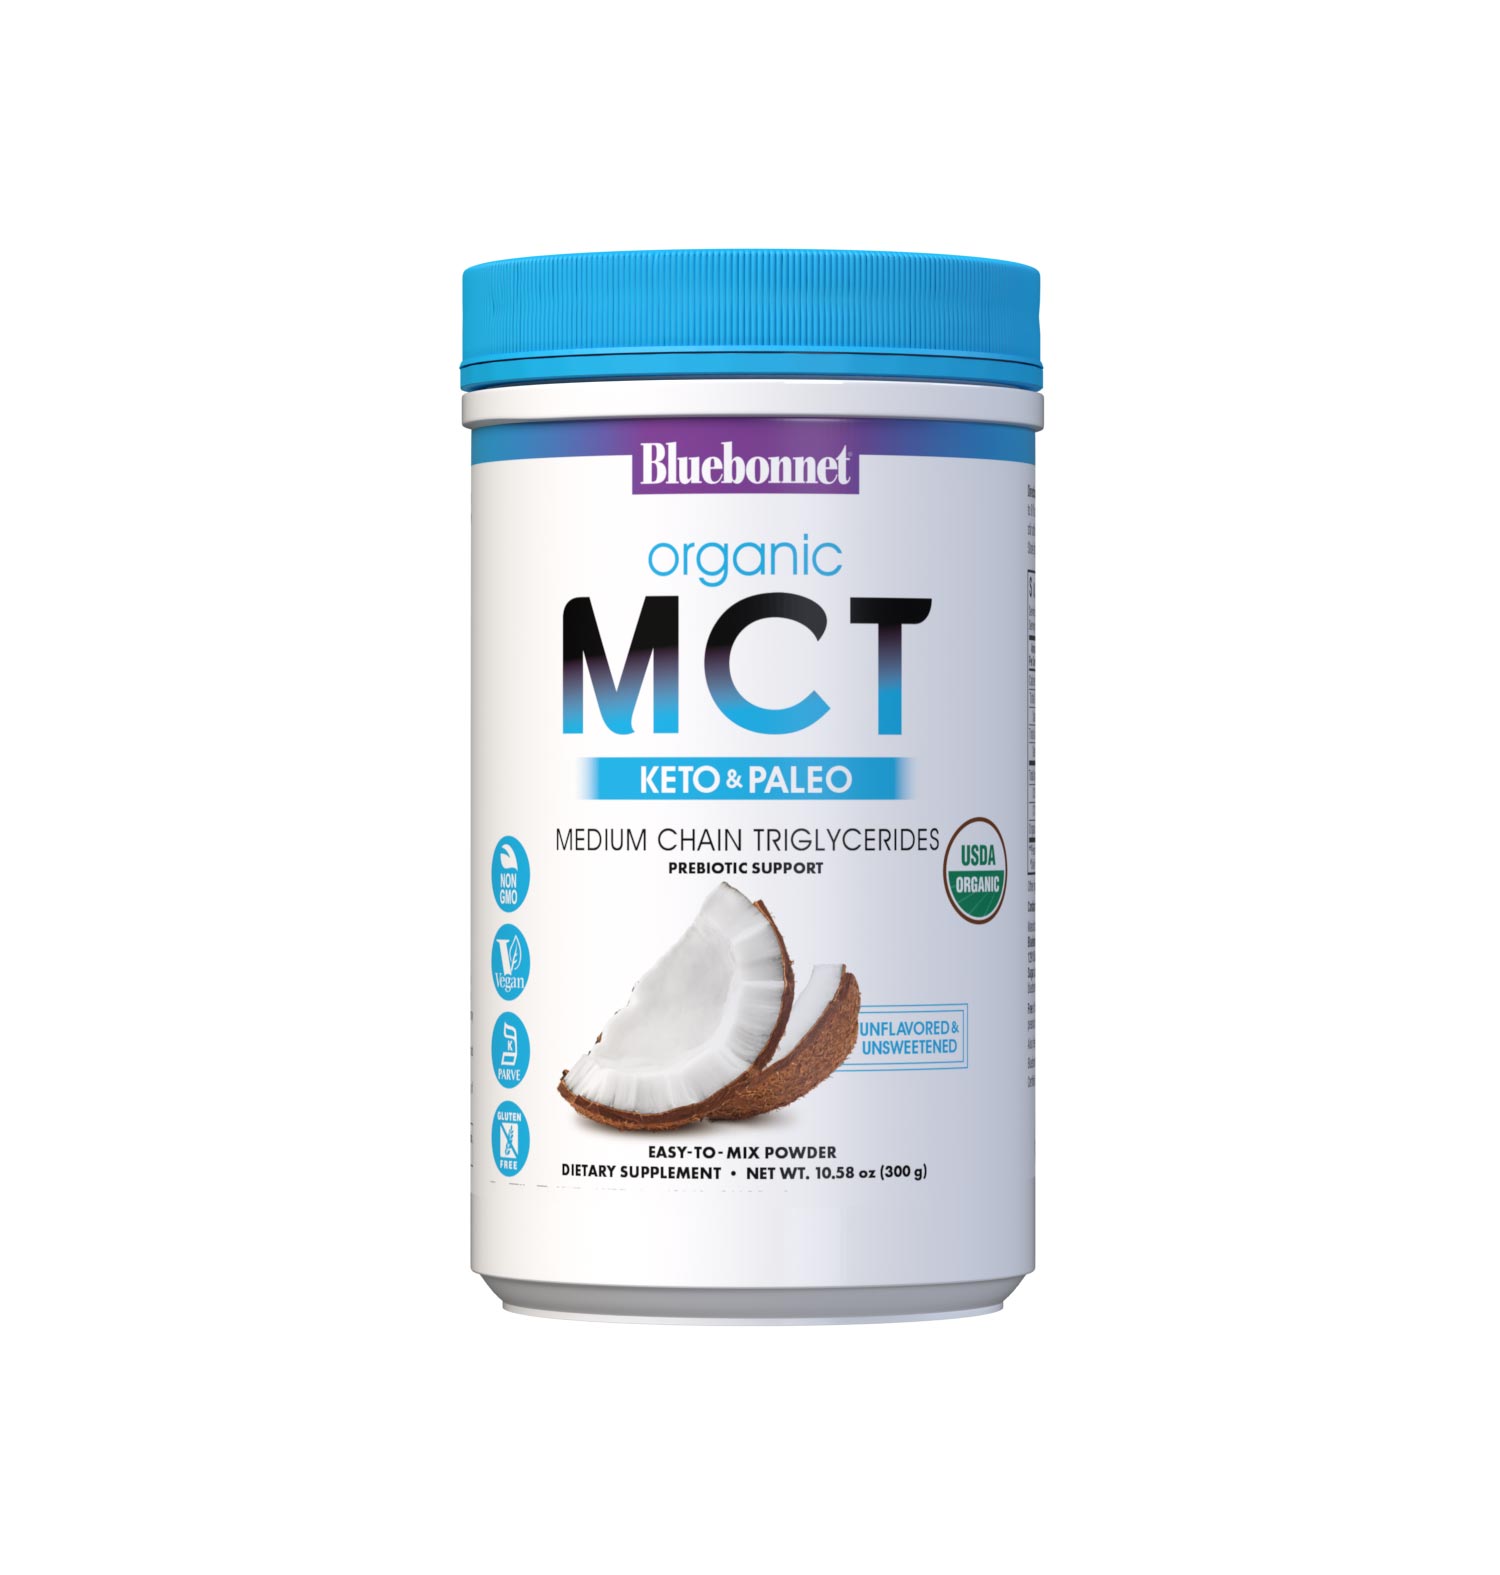 Bluebonnet’s Organic MCT Powder (10.58 oz canister) is carefully crafted from organic coconut oil and placed on a base of organic acacia prebiotic powder to further aid in healthy digestion. Medium chain triglycerides are ketogenic and rapidly absorbed. As an energy source, they can fuel both the brain and body for improved cognitive and athletic performance, as well as support weight management. #size_10.58 oz